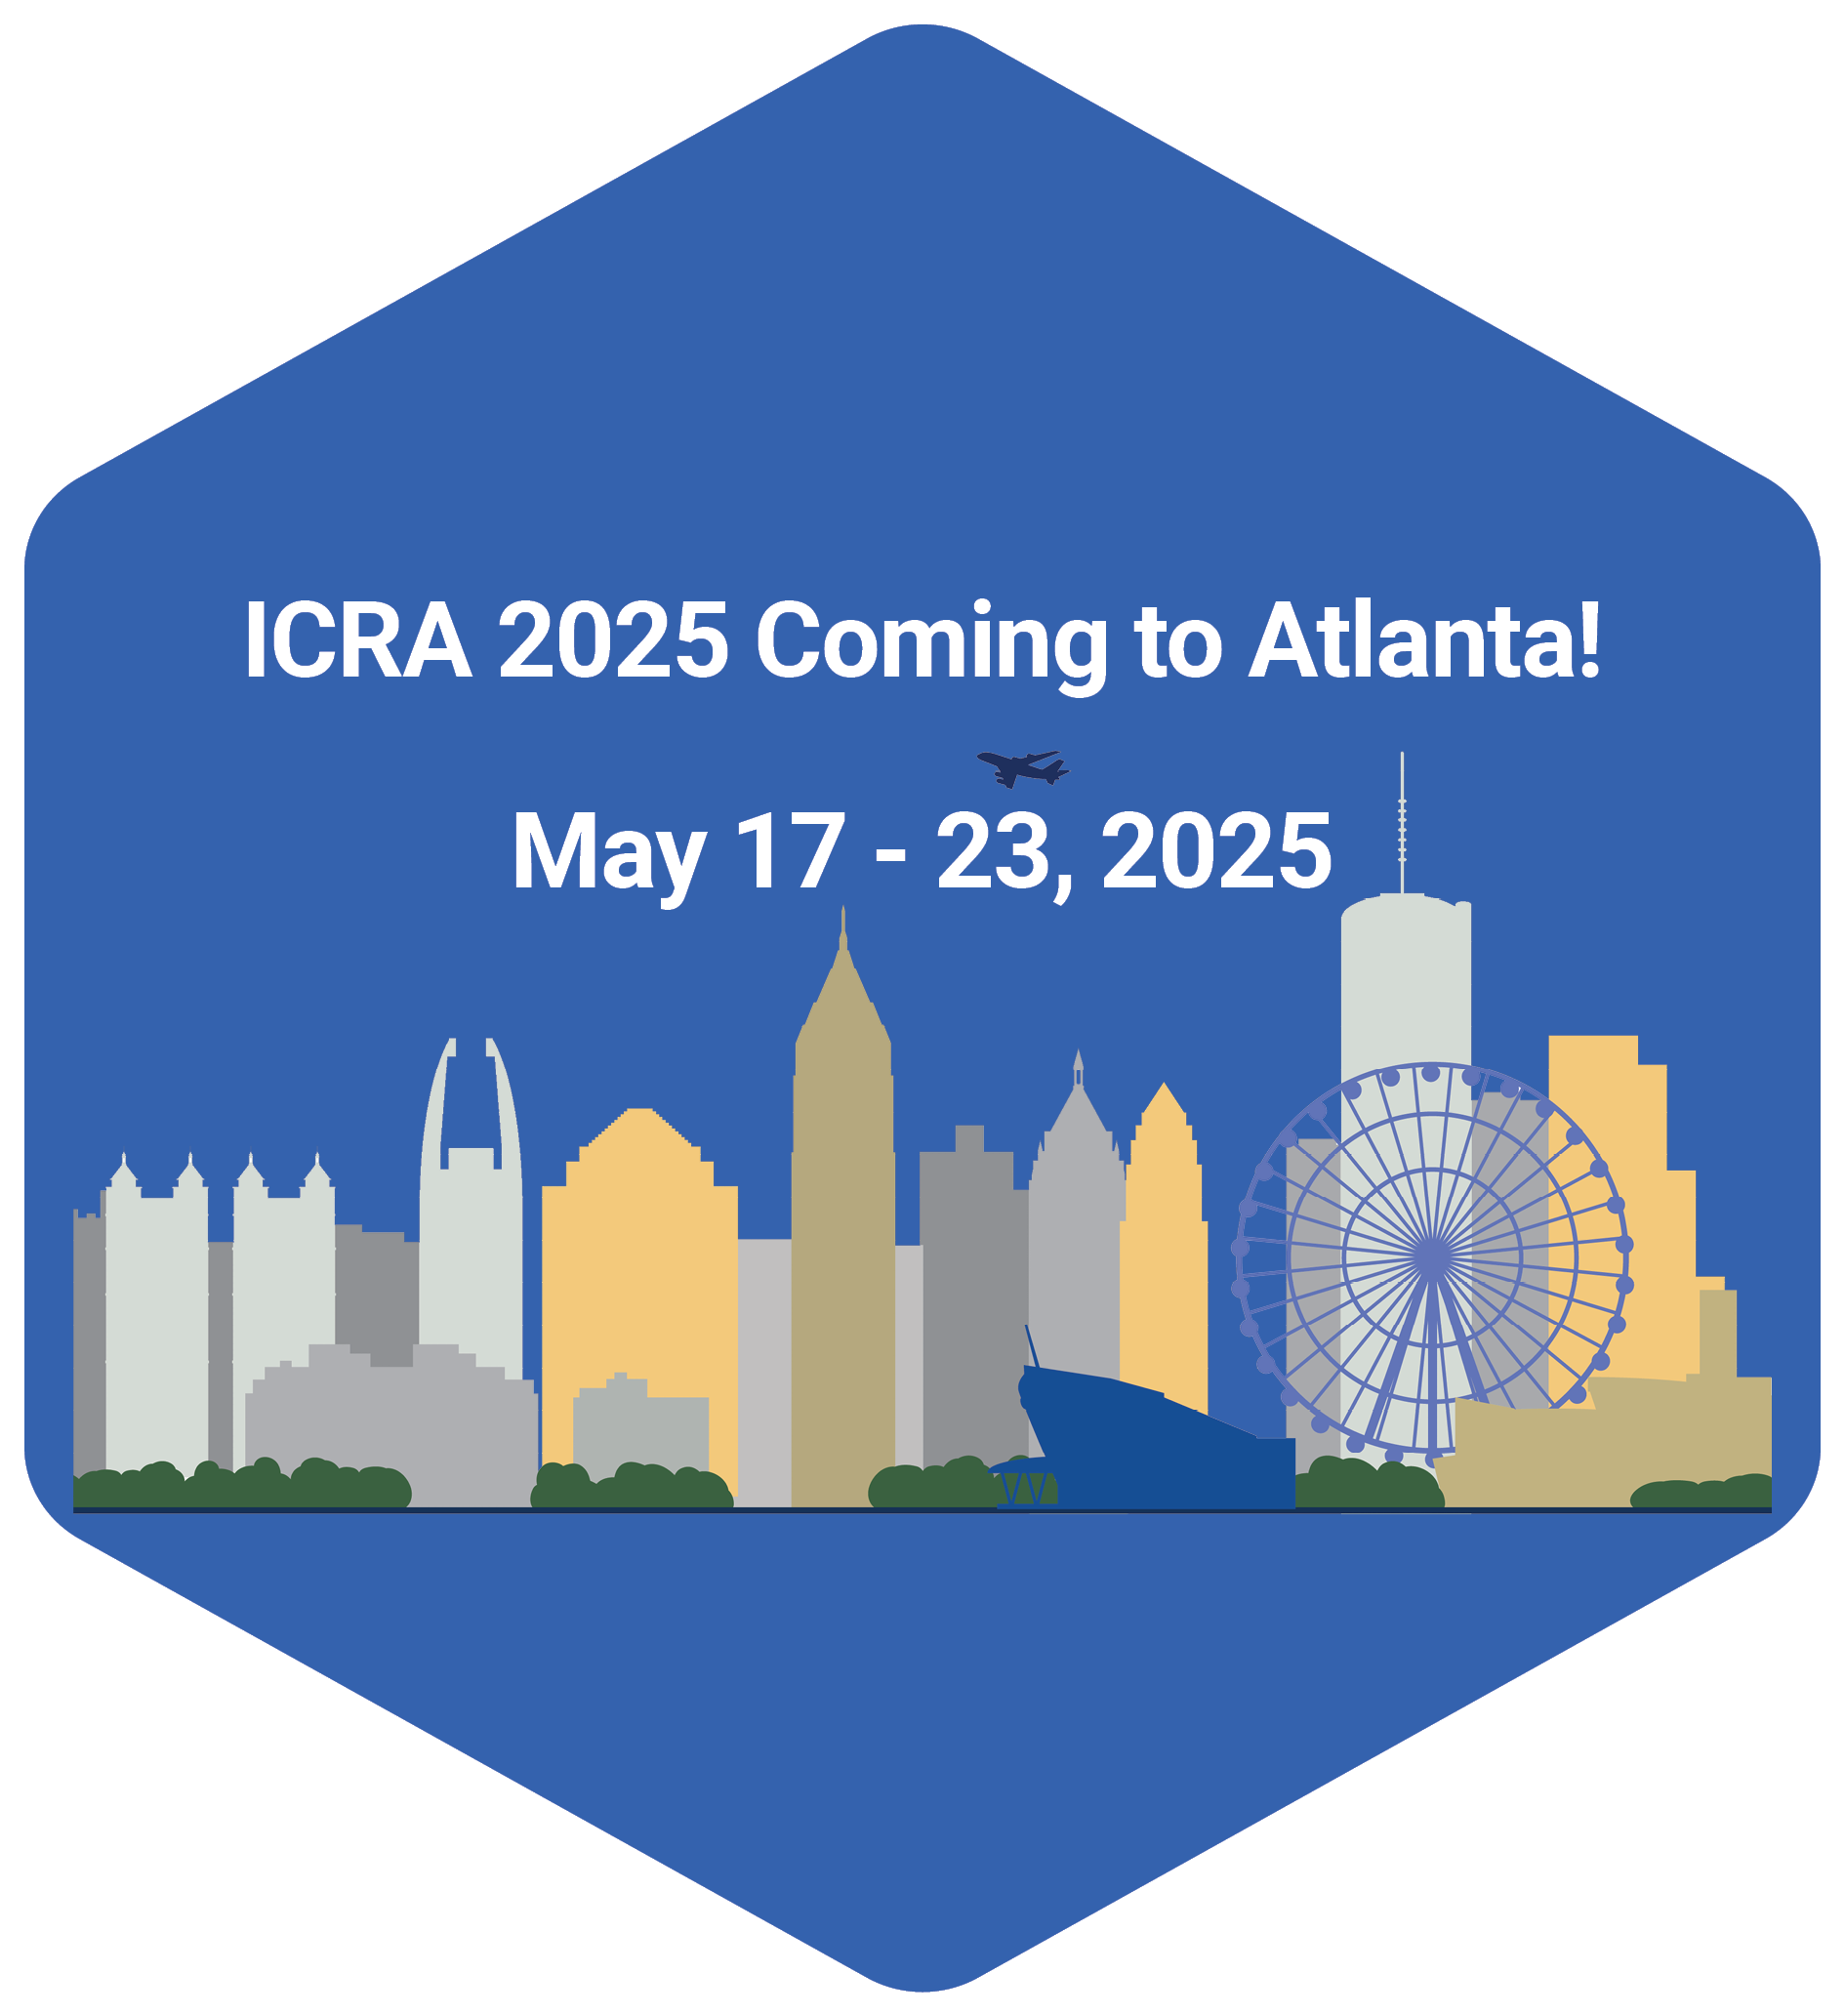 ICRA 2025 will be in Atlanta graphic